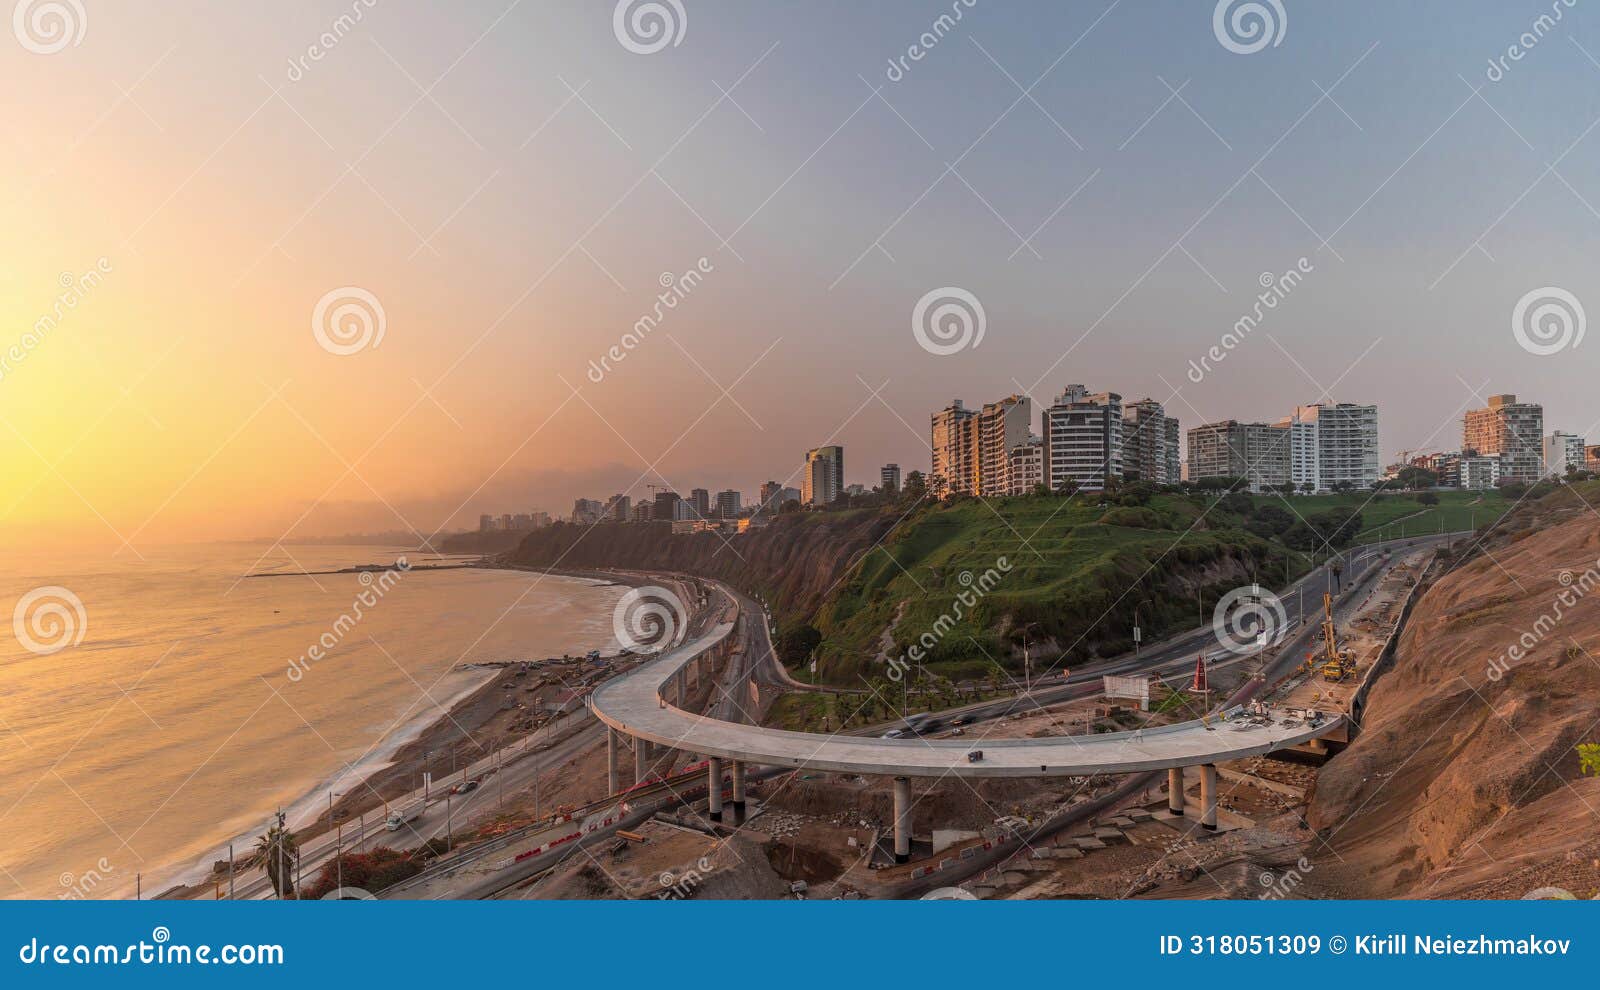 aerial view of lima's coastline in the neighborhood of miraflores during sunset timelapse, lima, peru